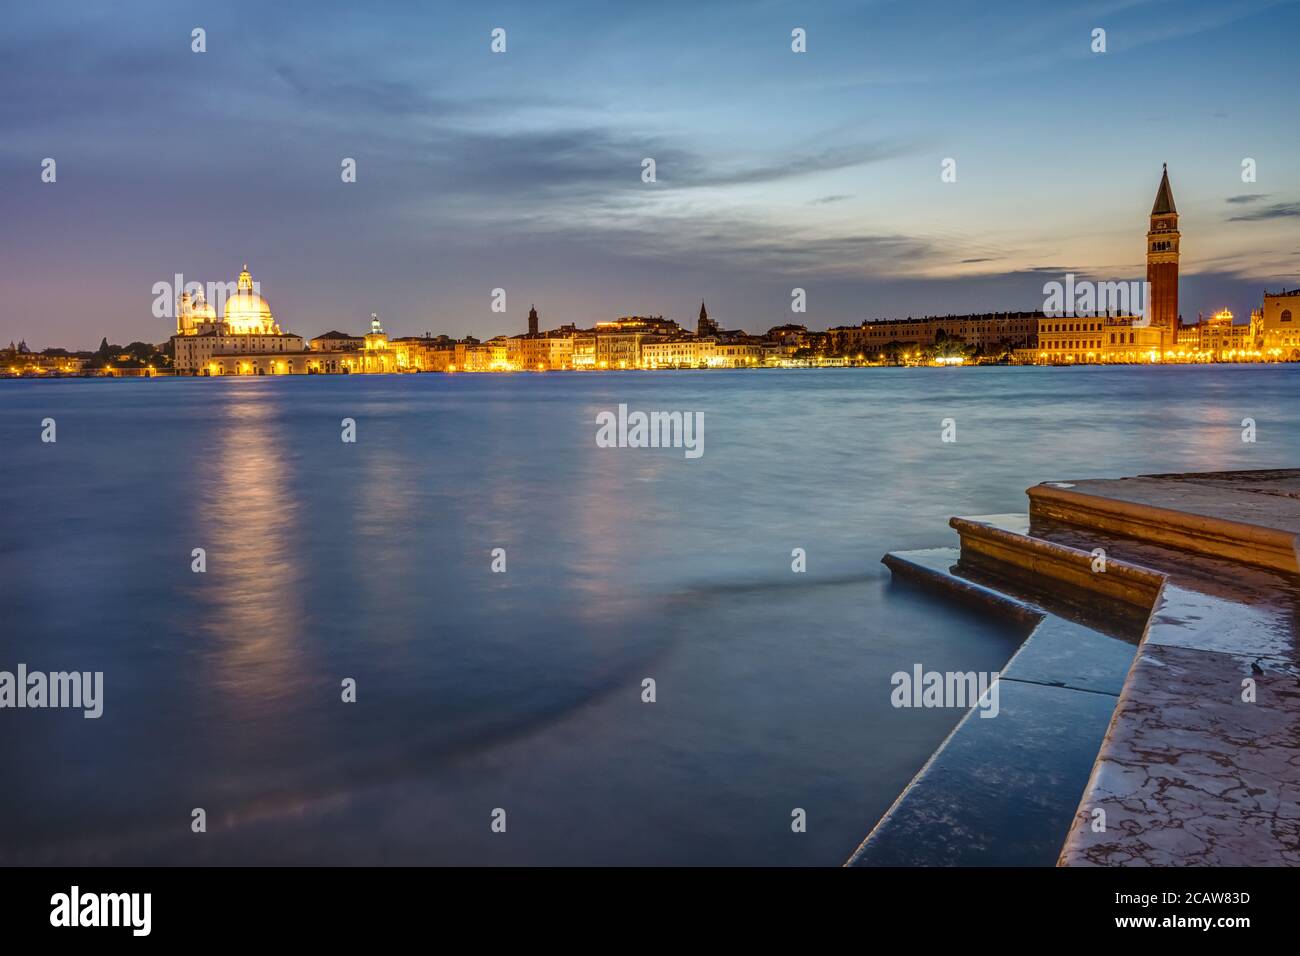 View to St Marks square and Punta della Dogana in Venice at night Stock Photo